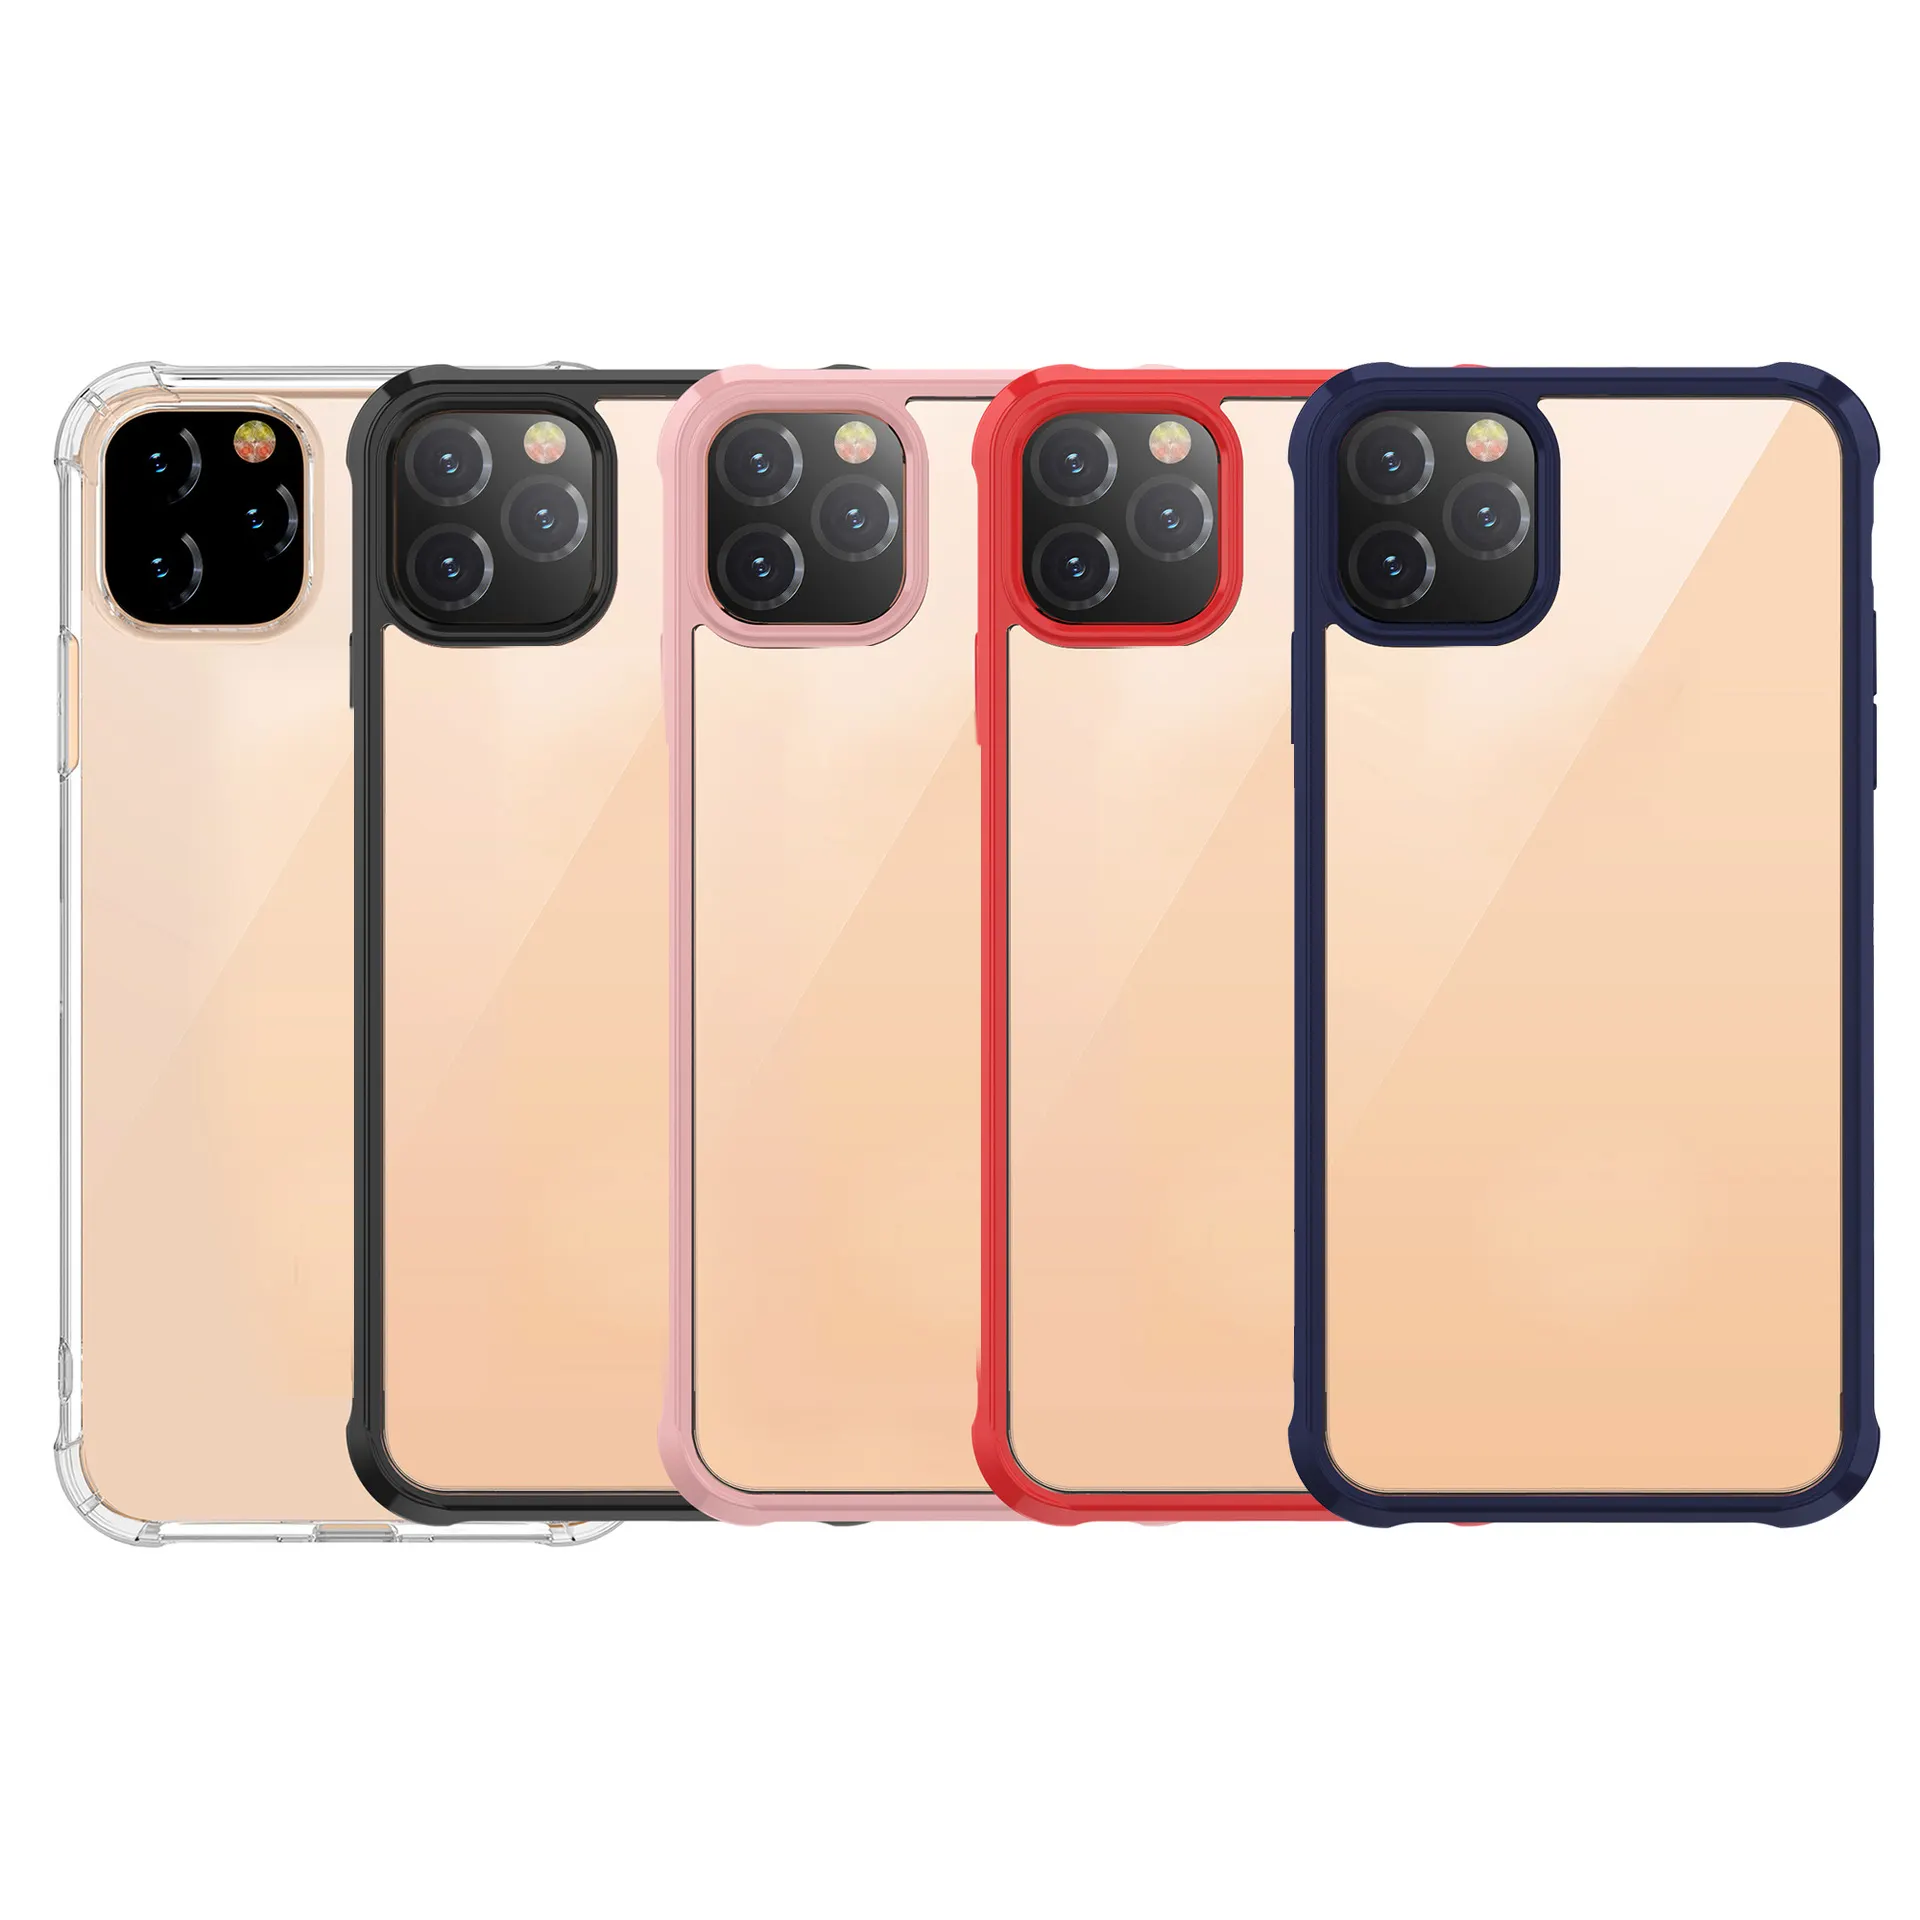 2019 Hot Sale Soft TPU Case Shockproof Protect Mobile Phone Accessories for iPhone 11/iPhone 11 Pro/iPhone 11 Pro Max